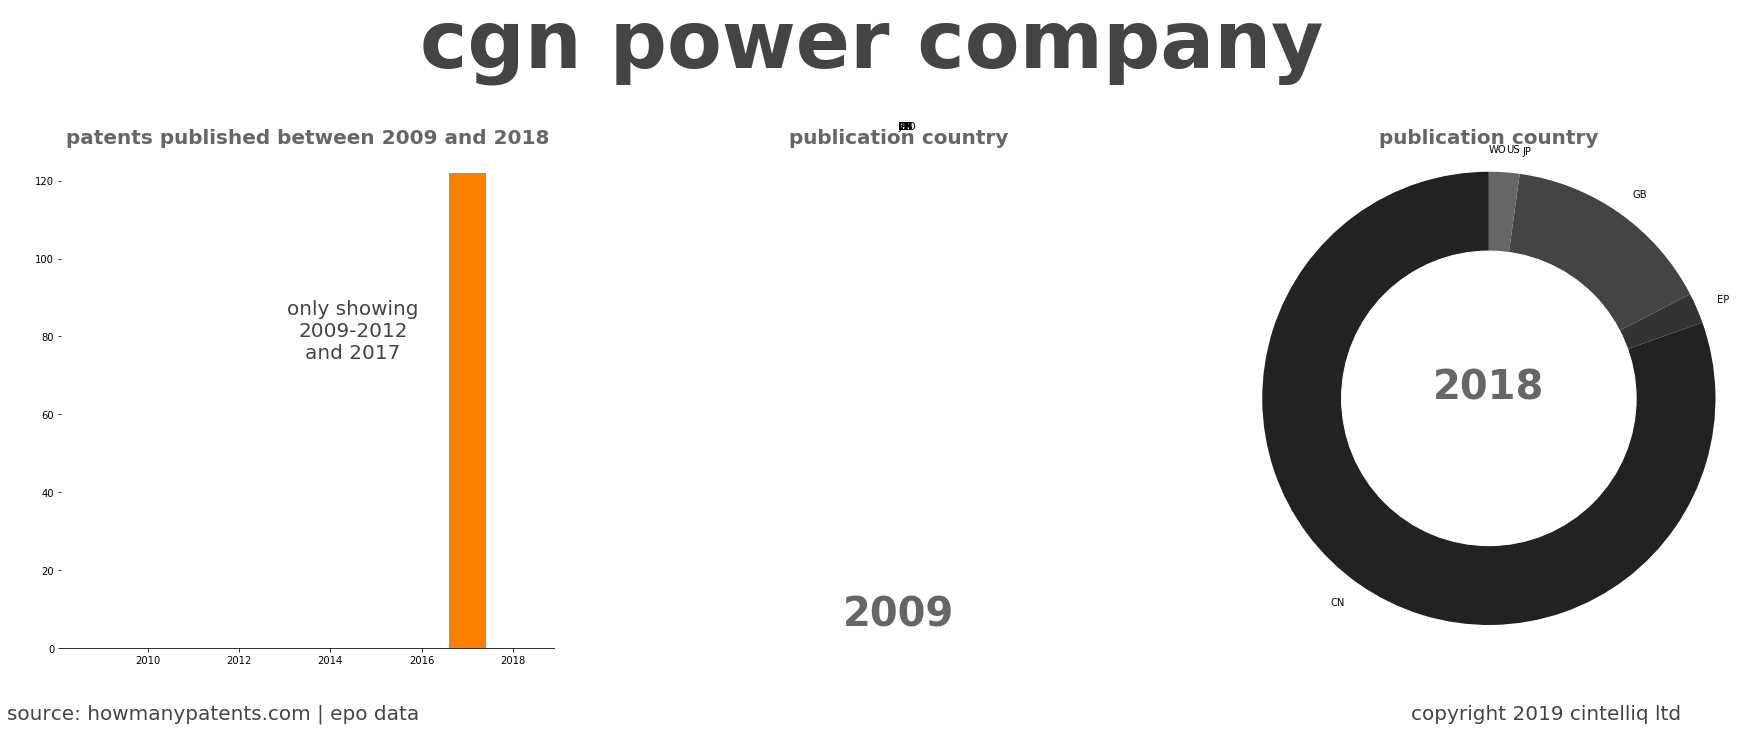 summary of patents for Cgn Power Company